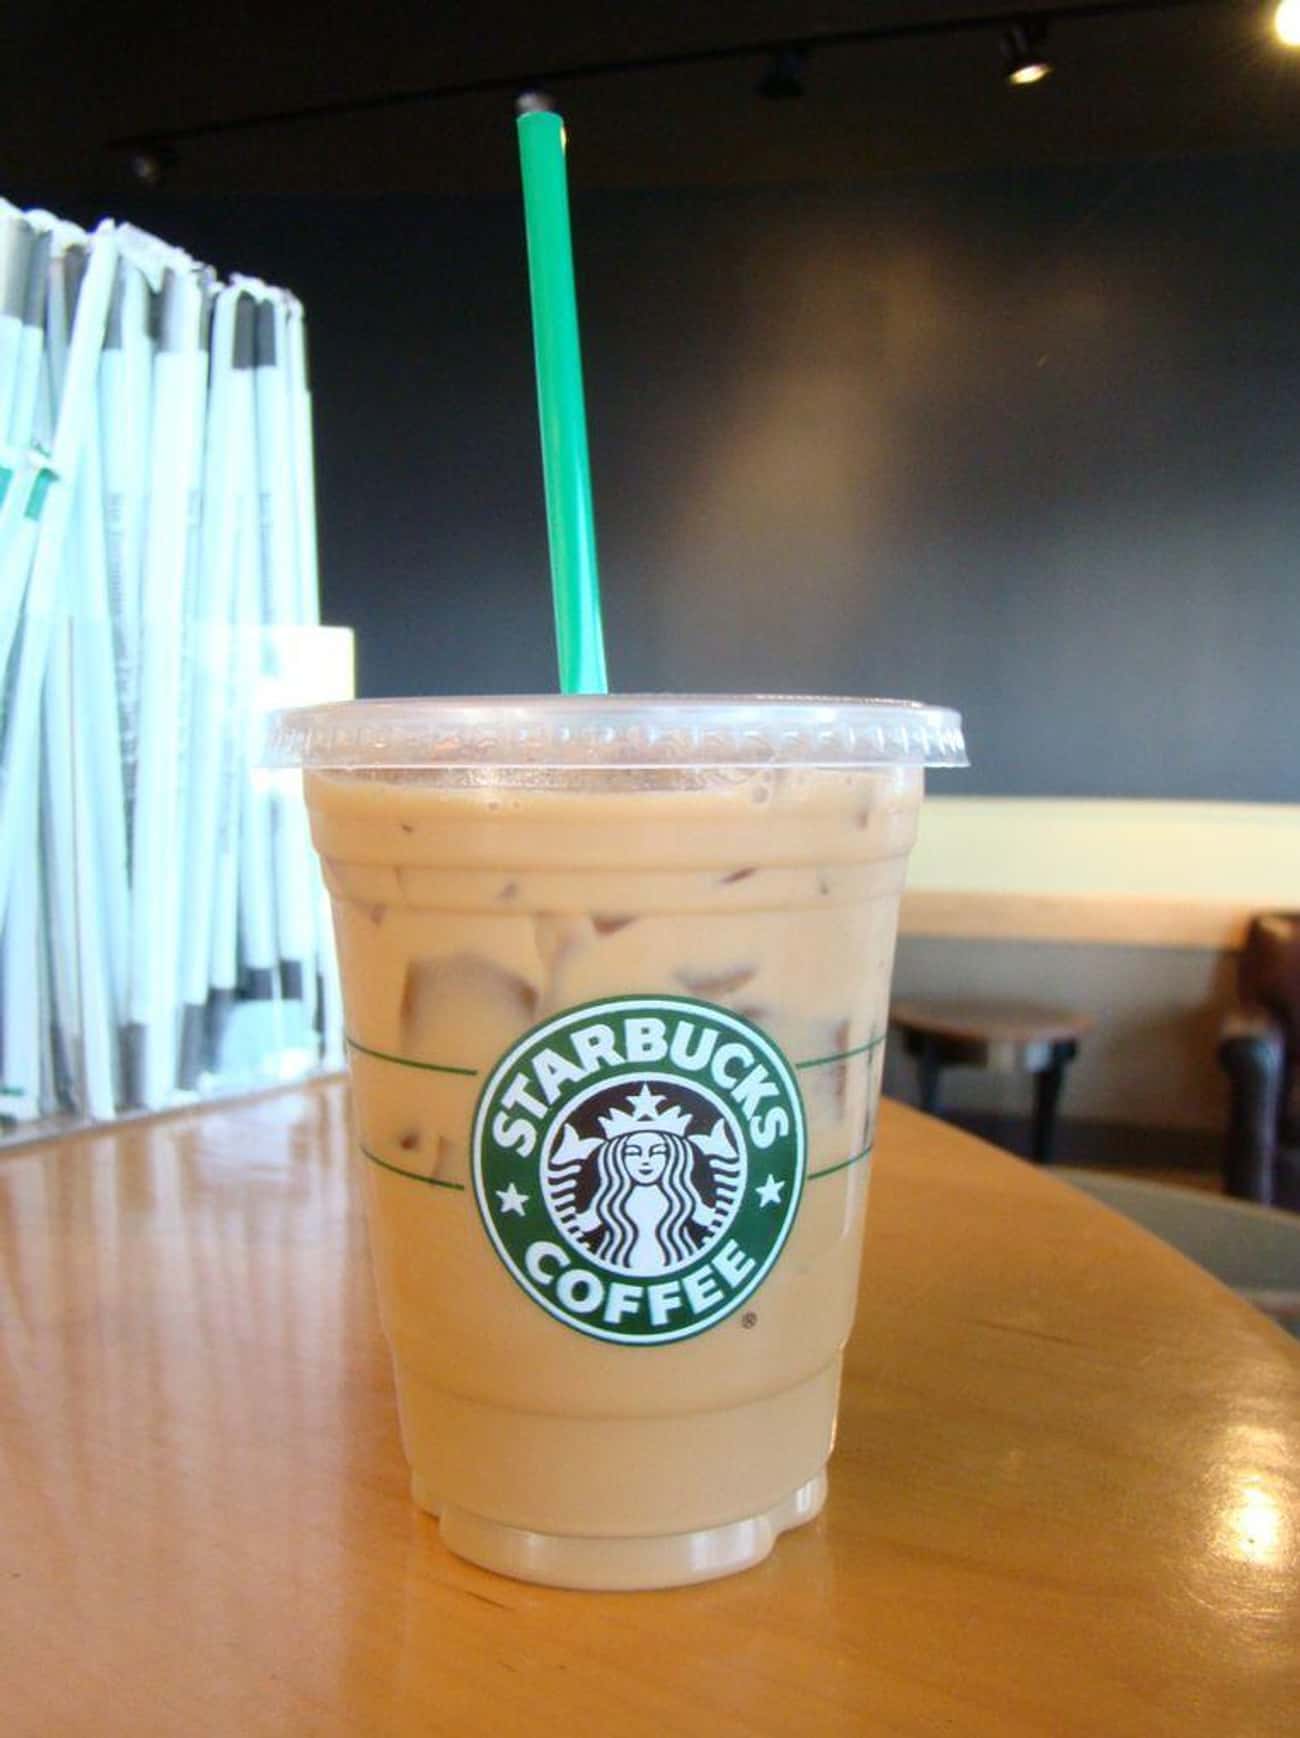 A Woman Sued Starbucks For Using Too Much Ice